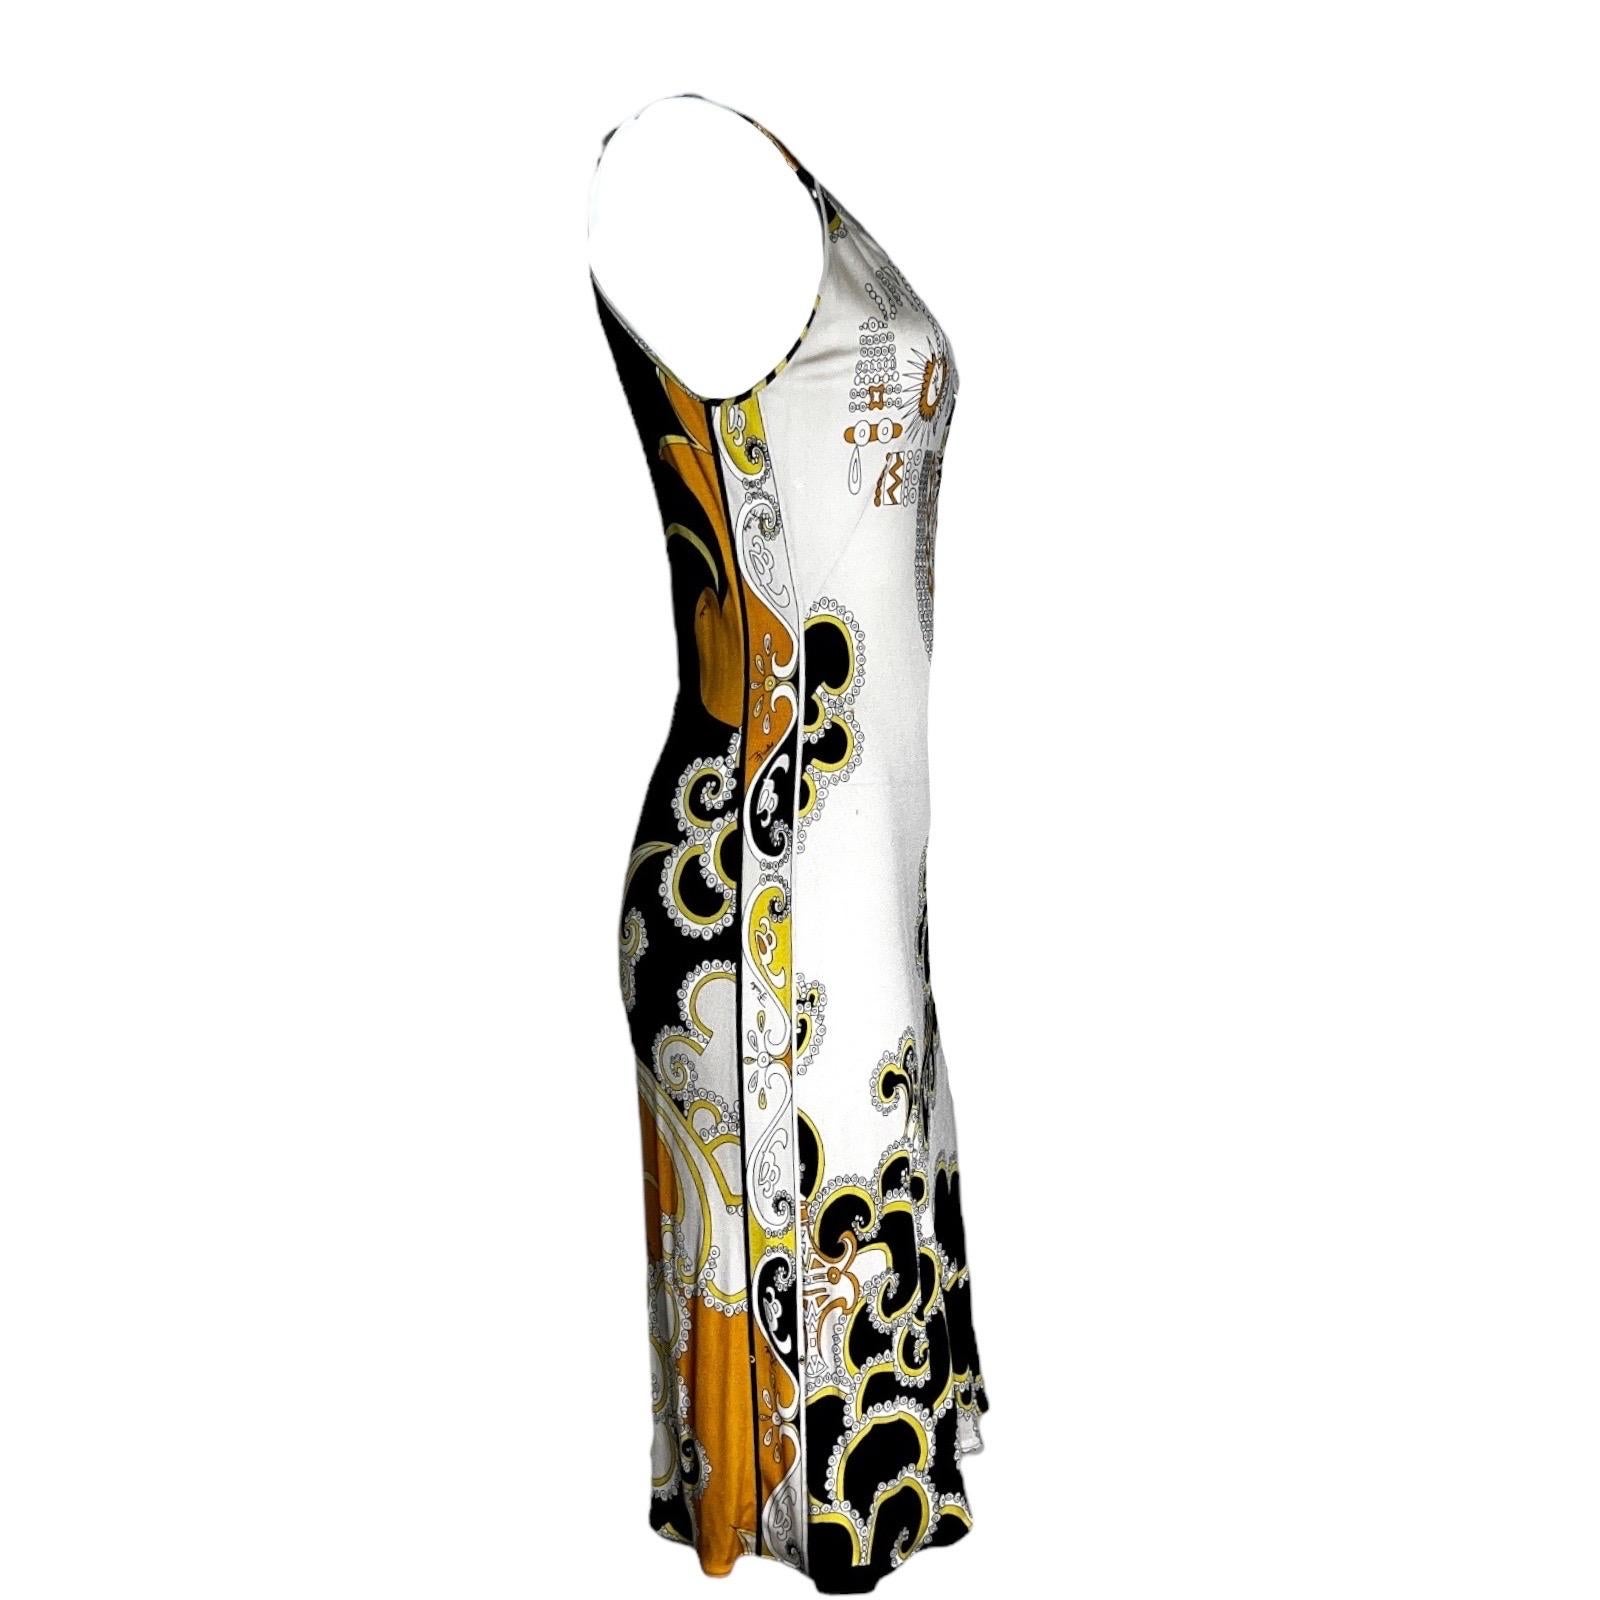 Exclusive and gorgeous EMILIO PUCCI dress
A rare and wonderful piece - you will hardly find anyone wearing the same dress
Made of soft silk jersey
Beautiful signature print with  